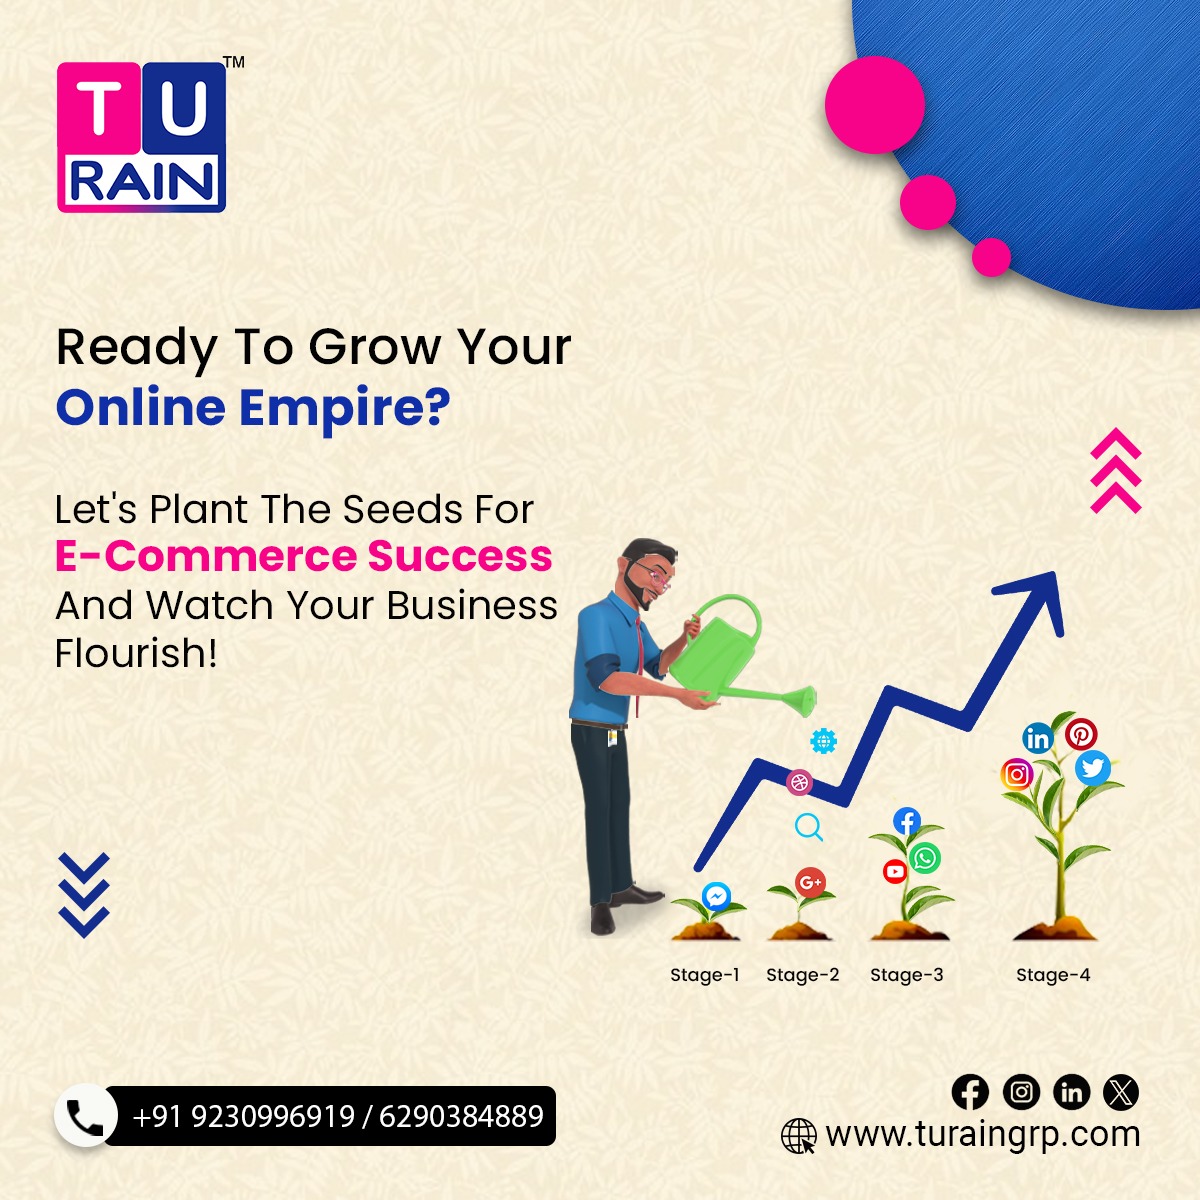 Developing your E-commerce empire Discover strategies for scaling your business and achieving new heights
Let's talk - 92309 96919 | Visit: 📷 turaingrp.com
#Turain #TurainSoftware #onlineempire #EcommerceGrowth #BusinessExpansion